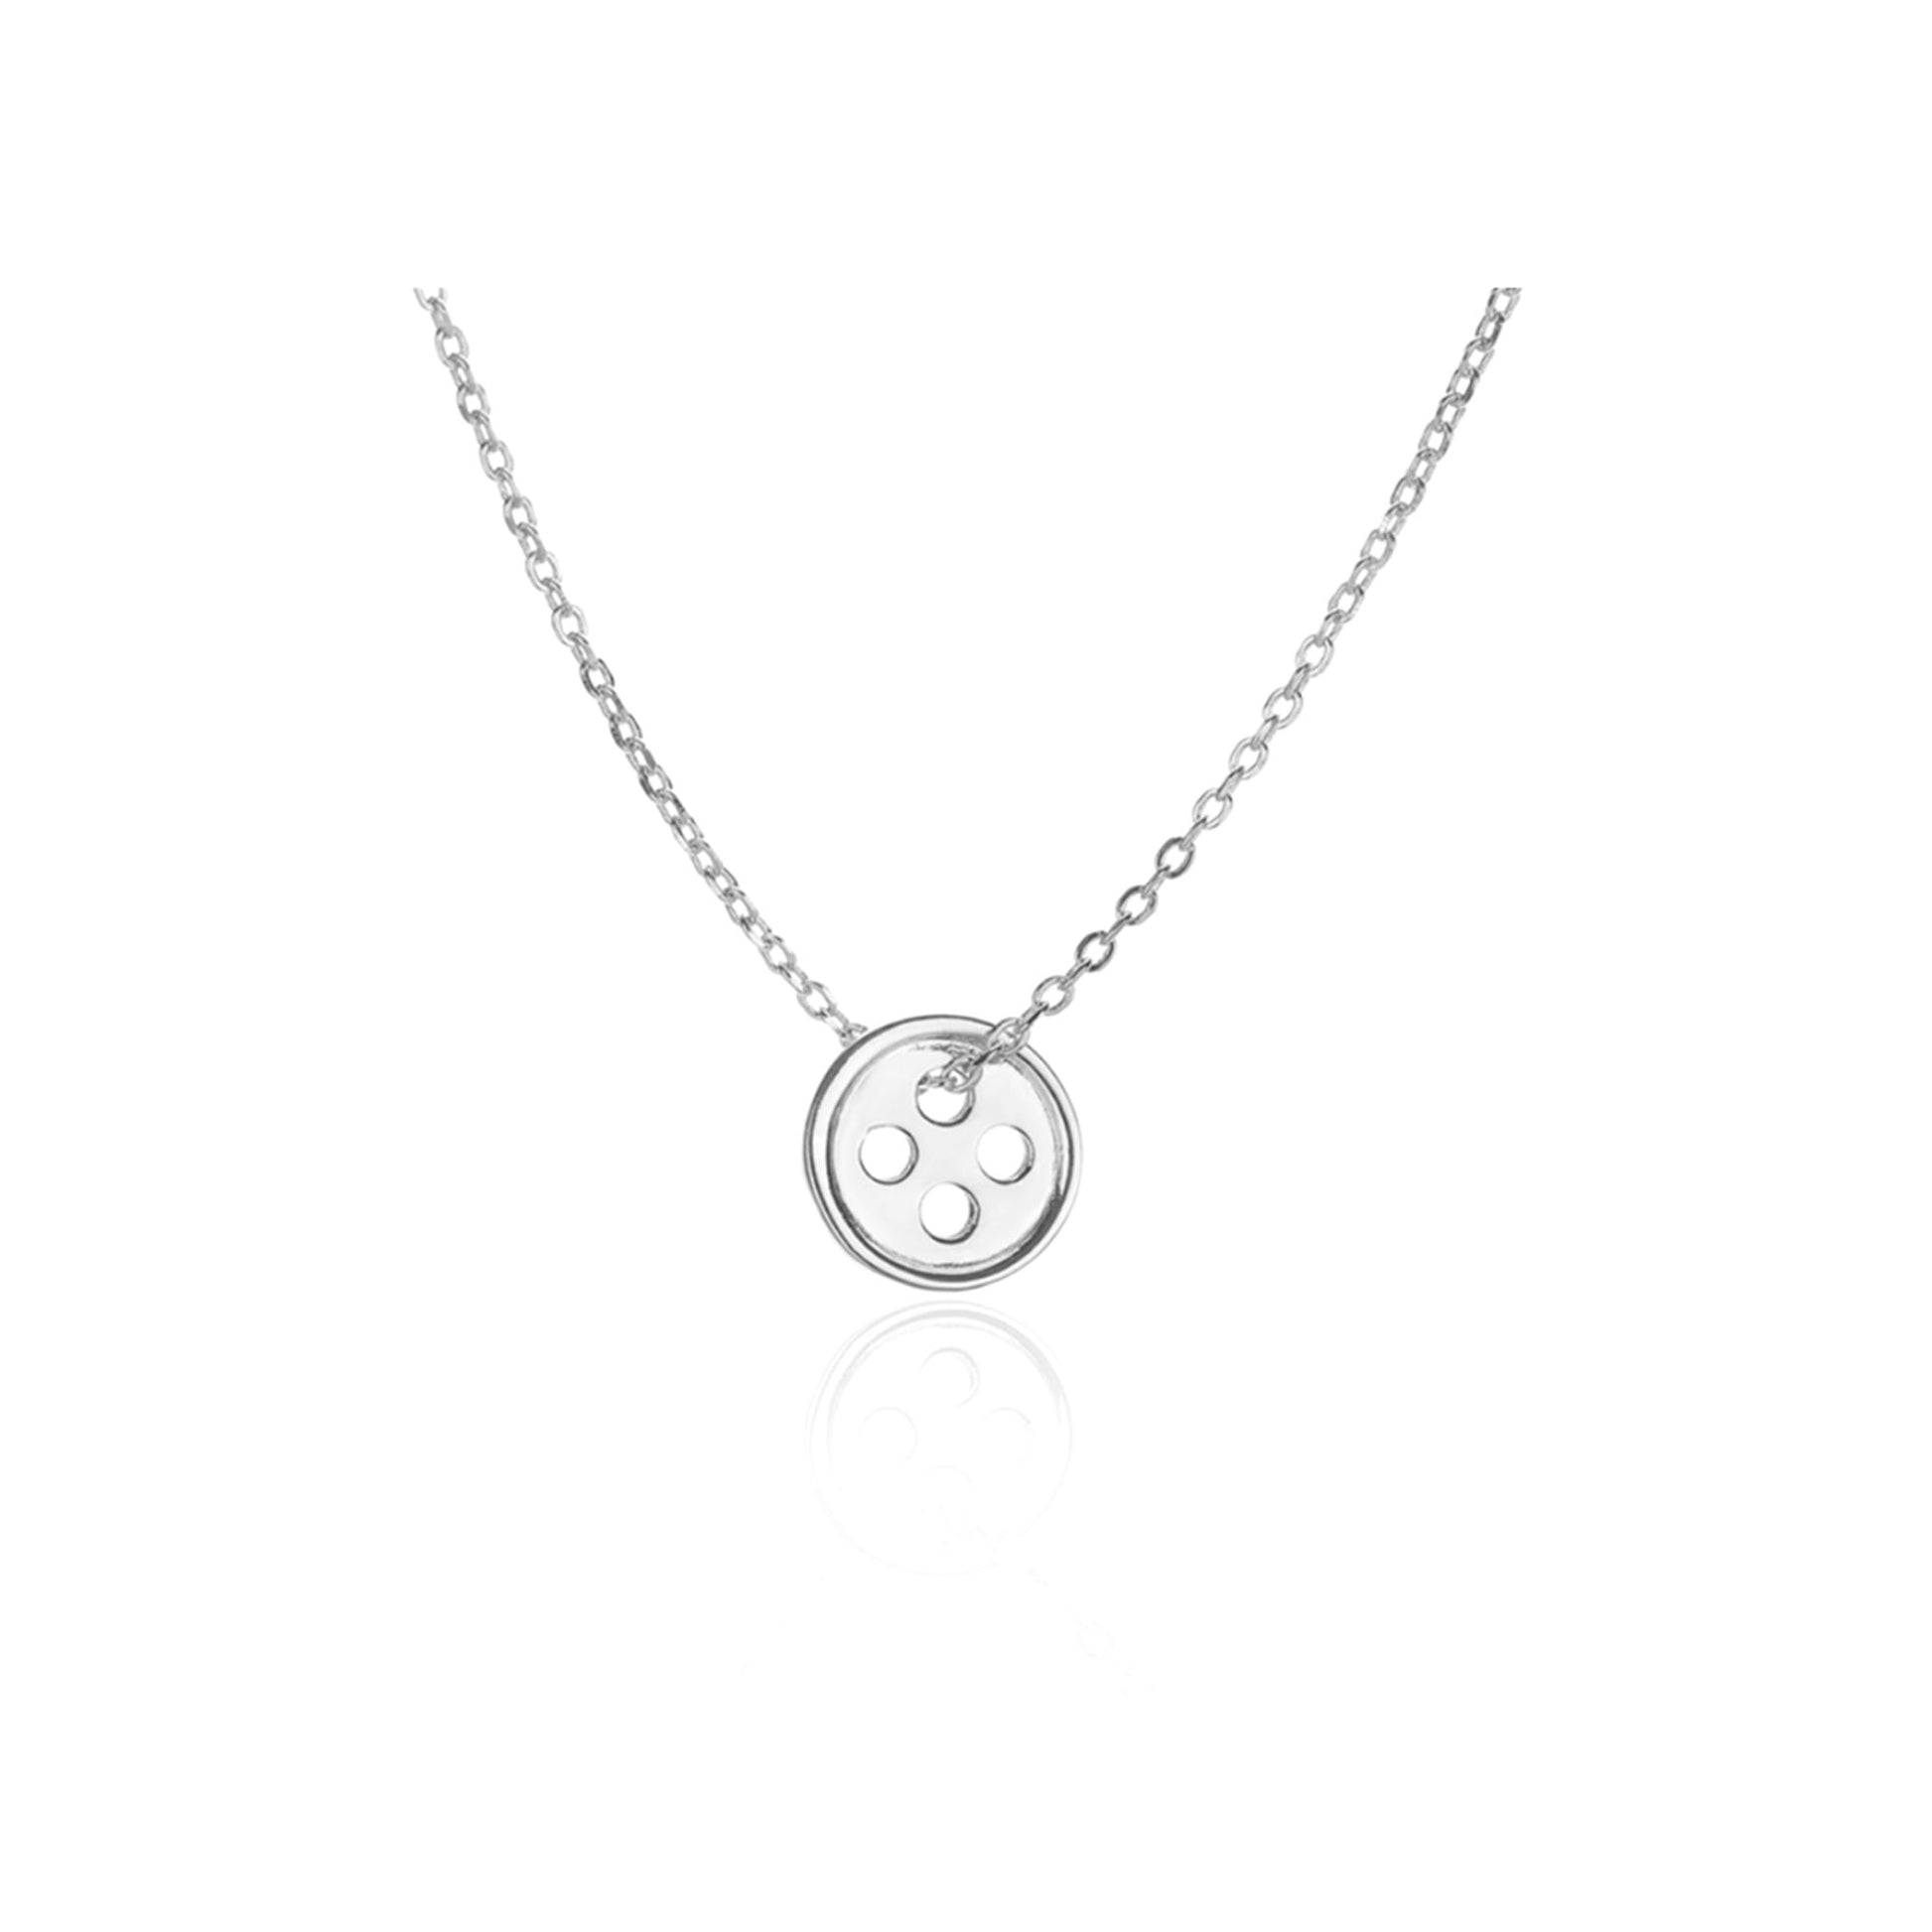 Sterling Silver Button Necklace with Sewing Button Disc Charm in 3 Tones - sugarkittenlondon